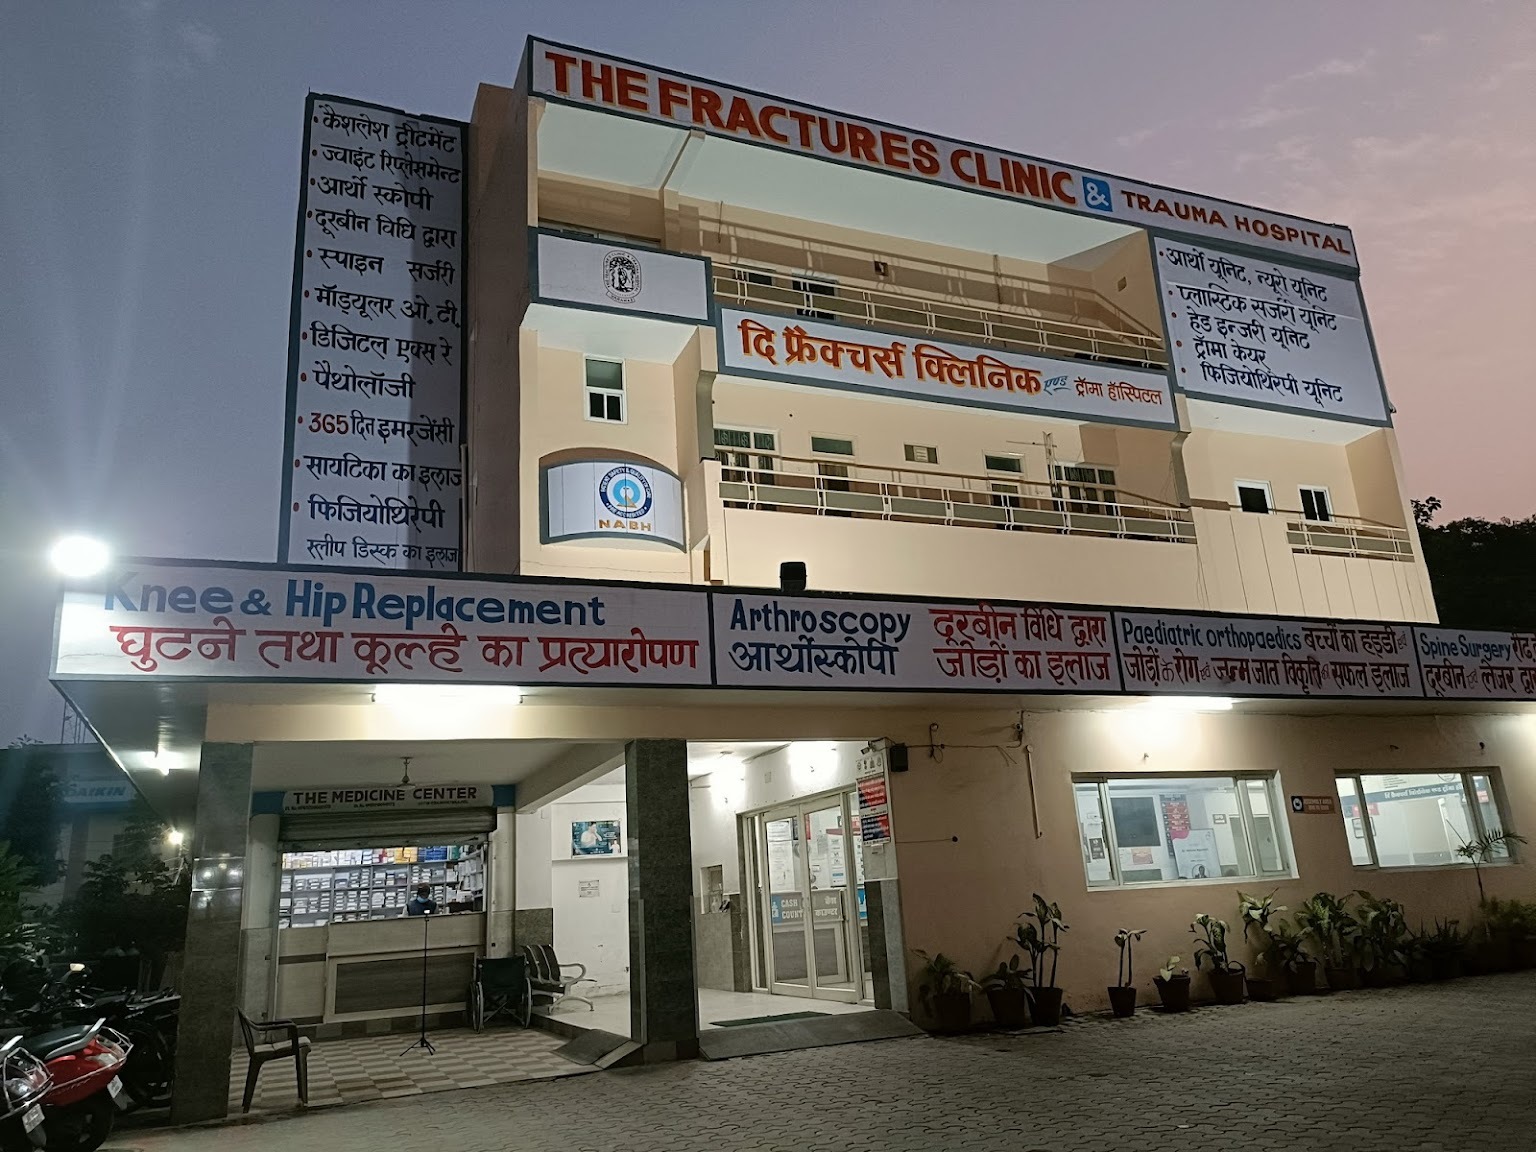 The Fractures Clinic And Trauma Hospital